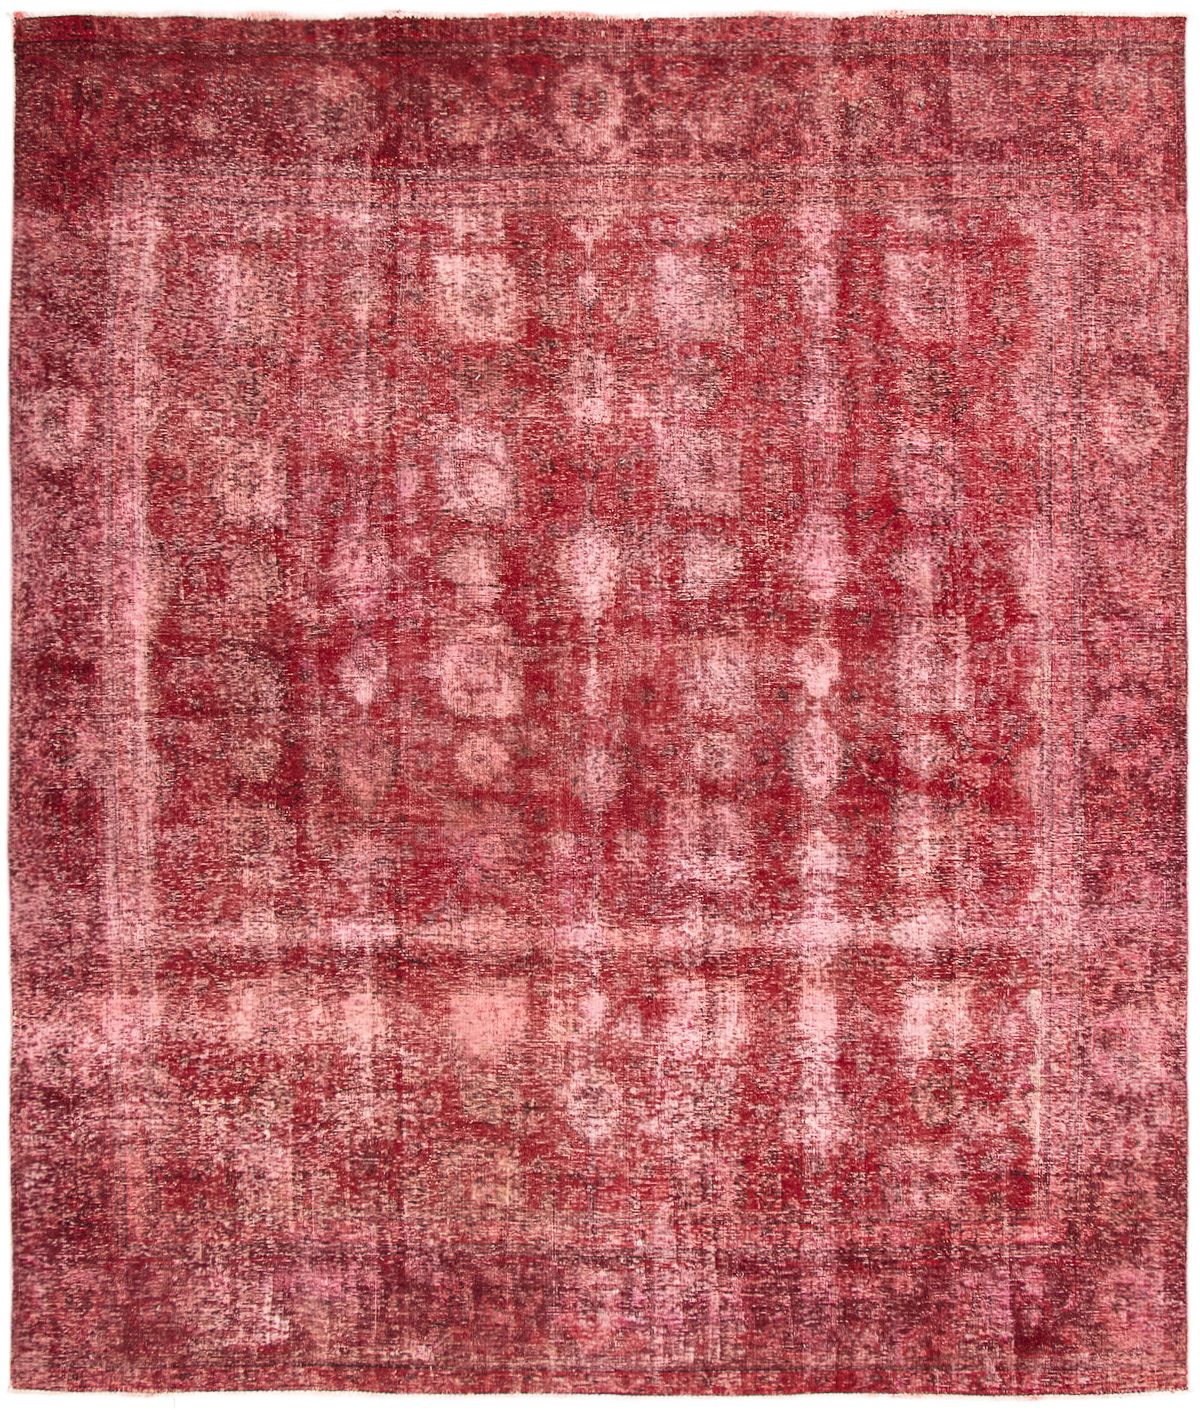 Hand-knotted Color Transition Dark Red Wool Rug 9'0" x 10'7" Size: 9'0" x 10'7"  